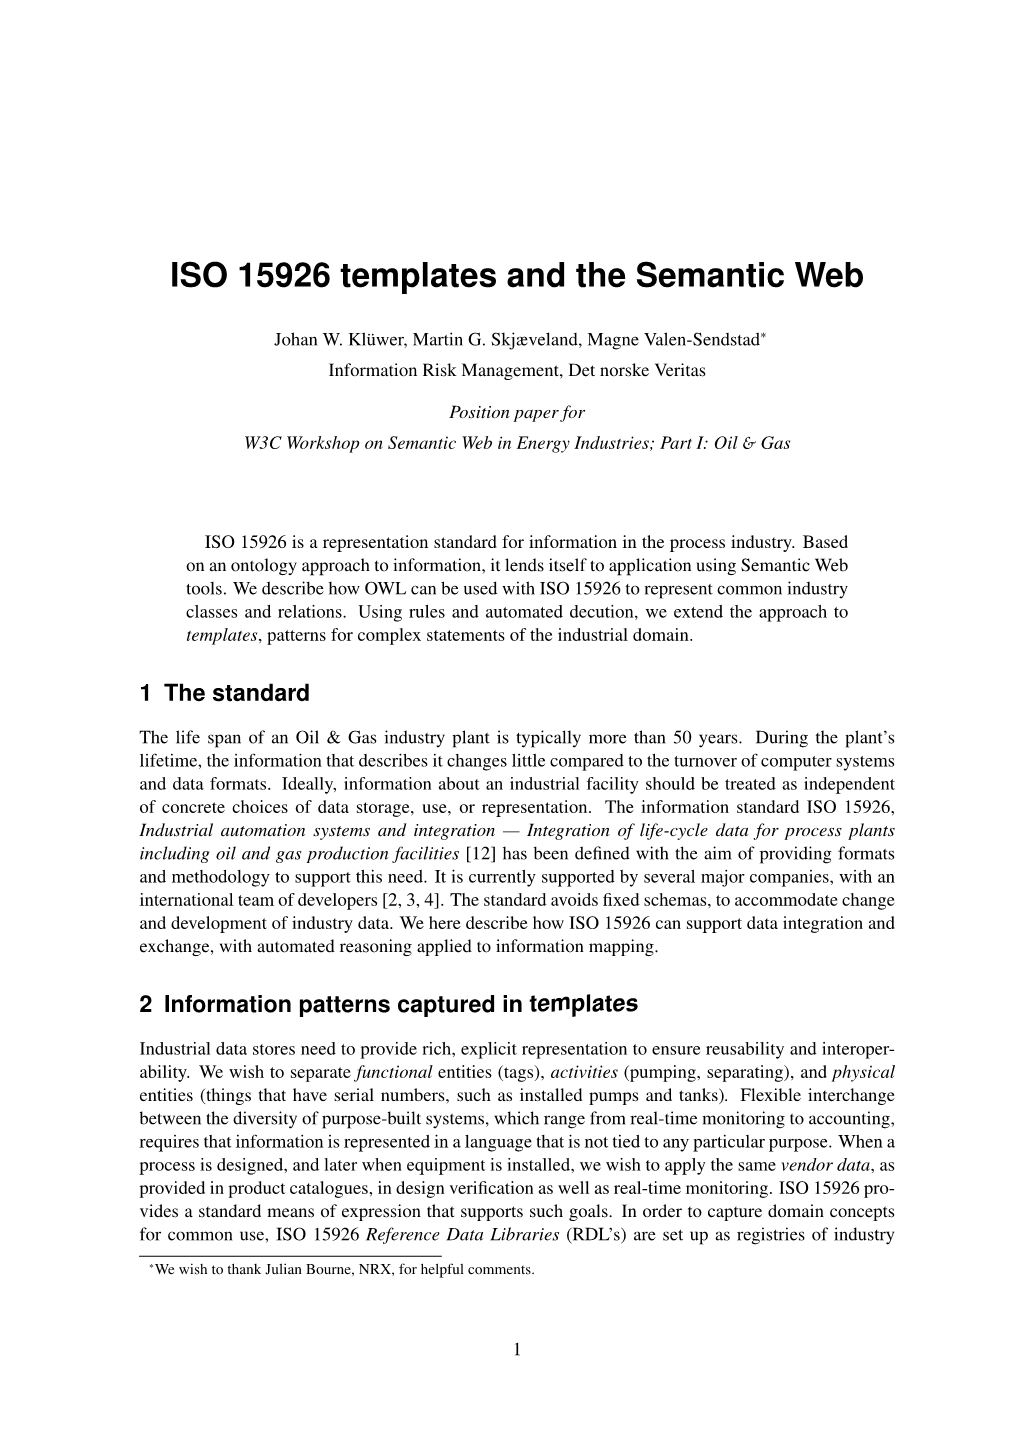 ISO 15926 Templates and the Semantic Web